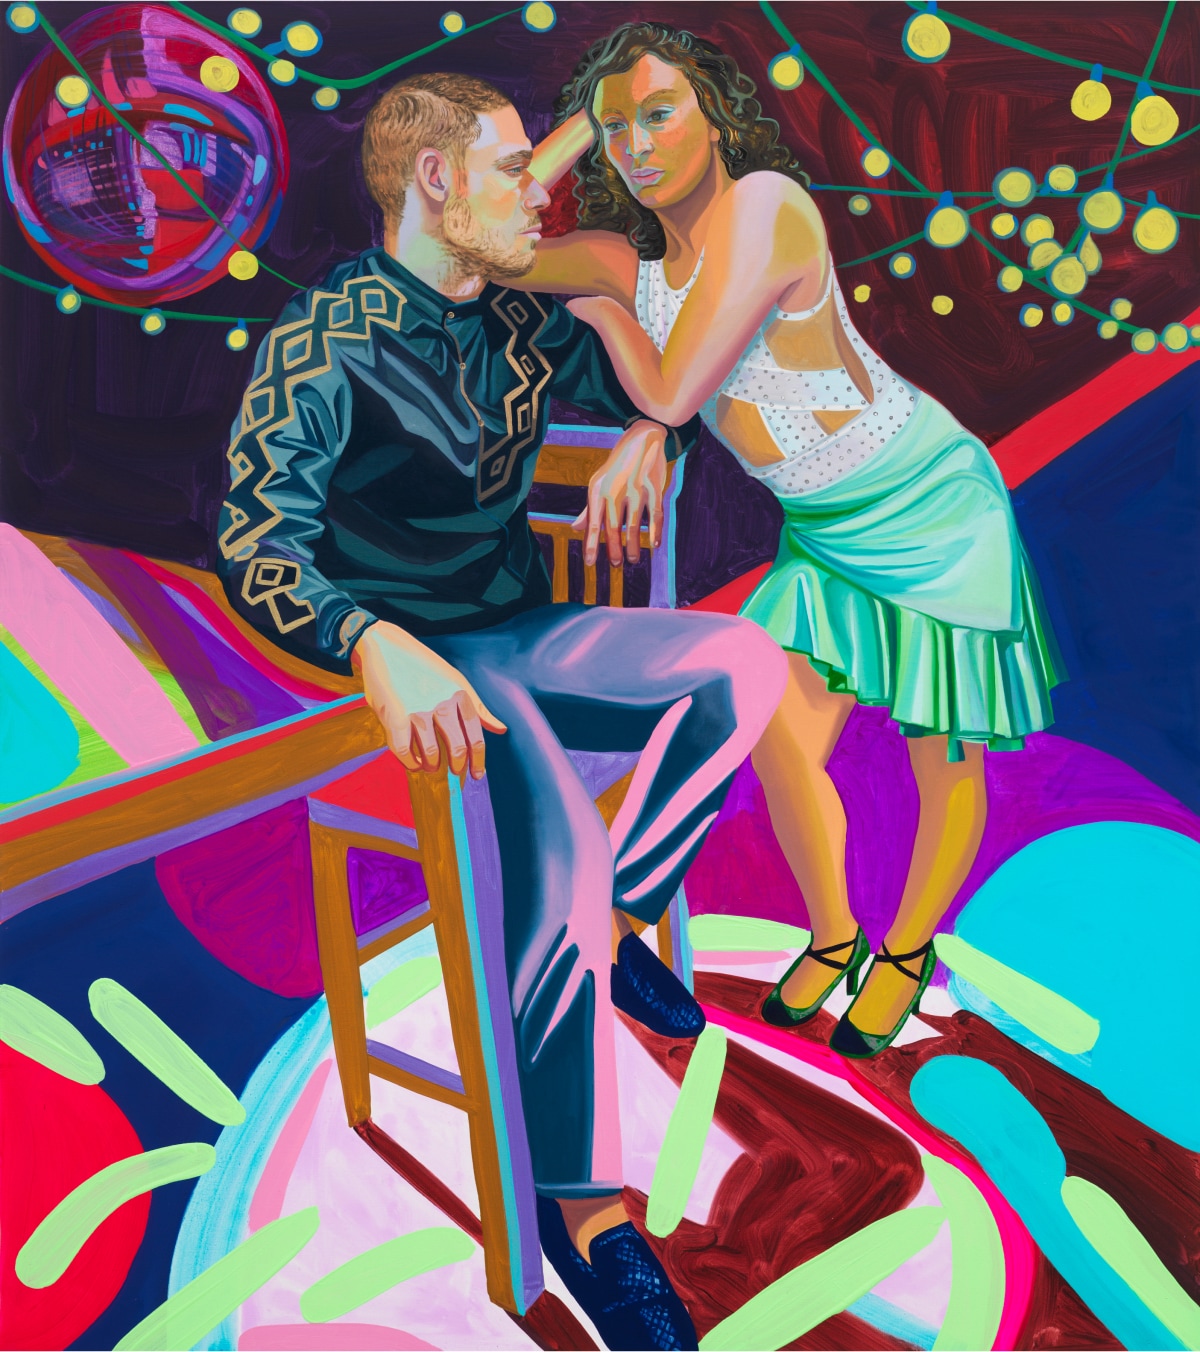 Nisenbaum’s “Jenna and Moises” featuring a man and woman, facing one another, in a colorful dance club